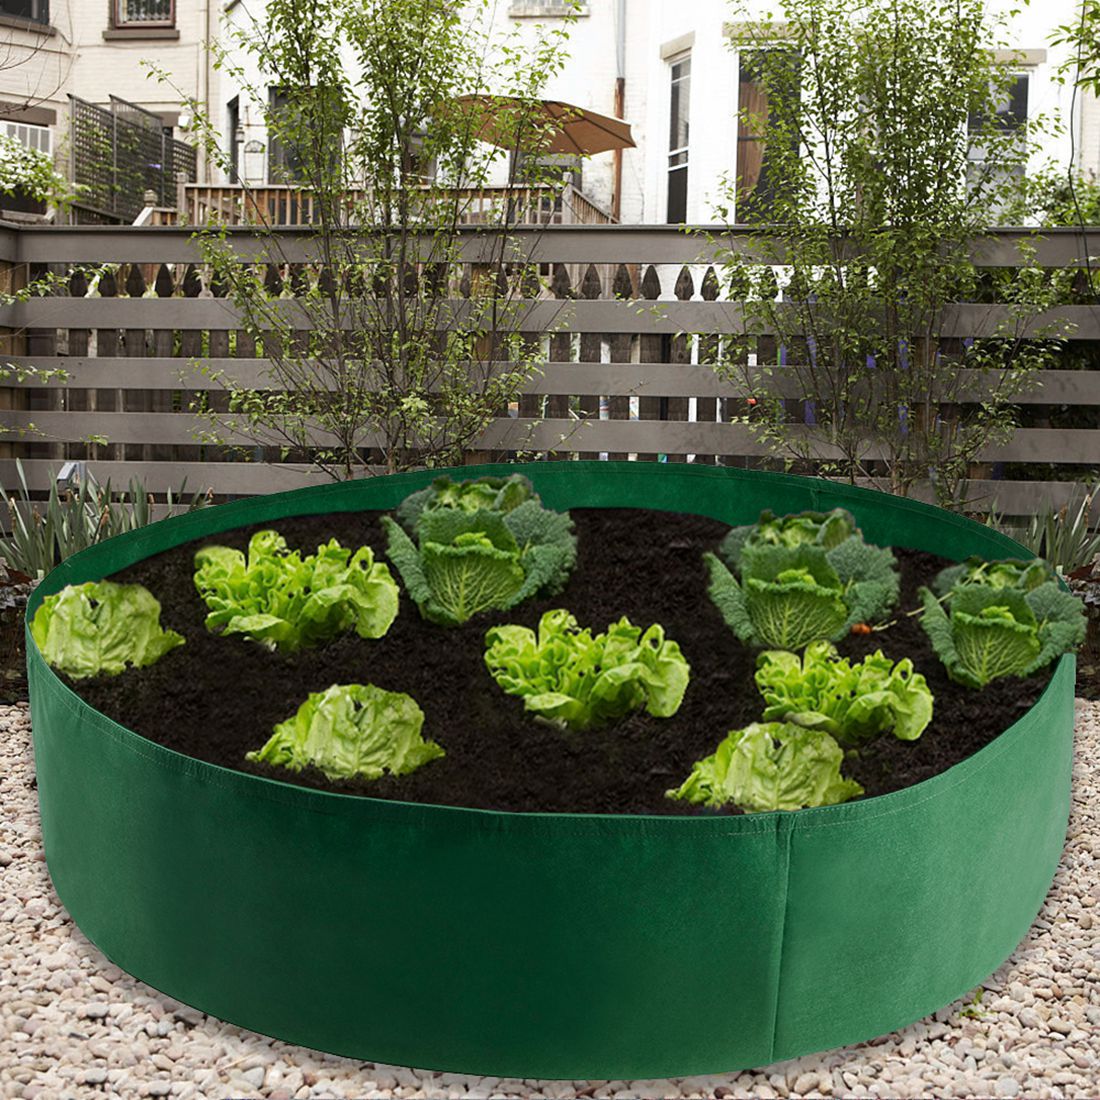 Garden Raised Bed Round Planting Container Grow Bags Fabric Planter Pot For Plants Nursery Pot